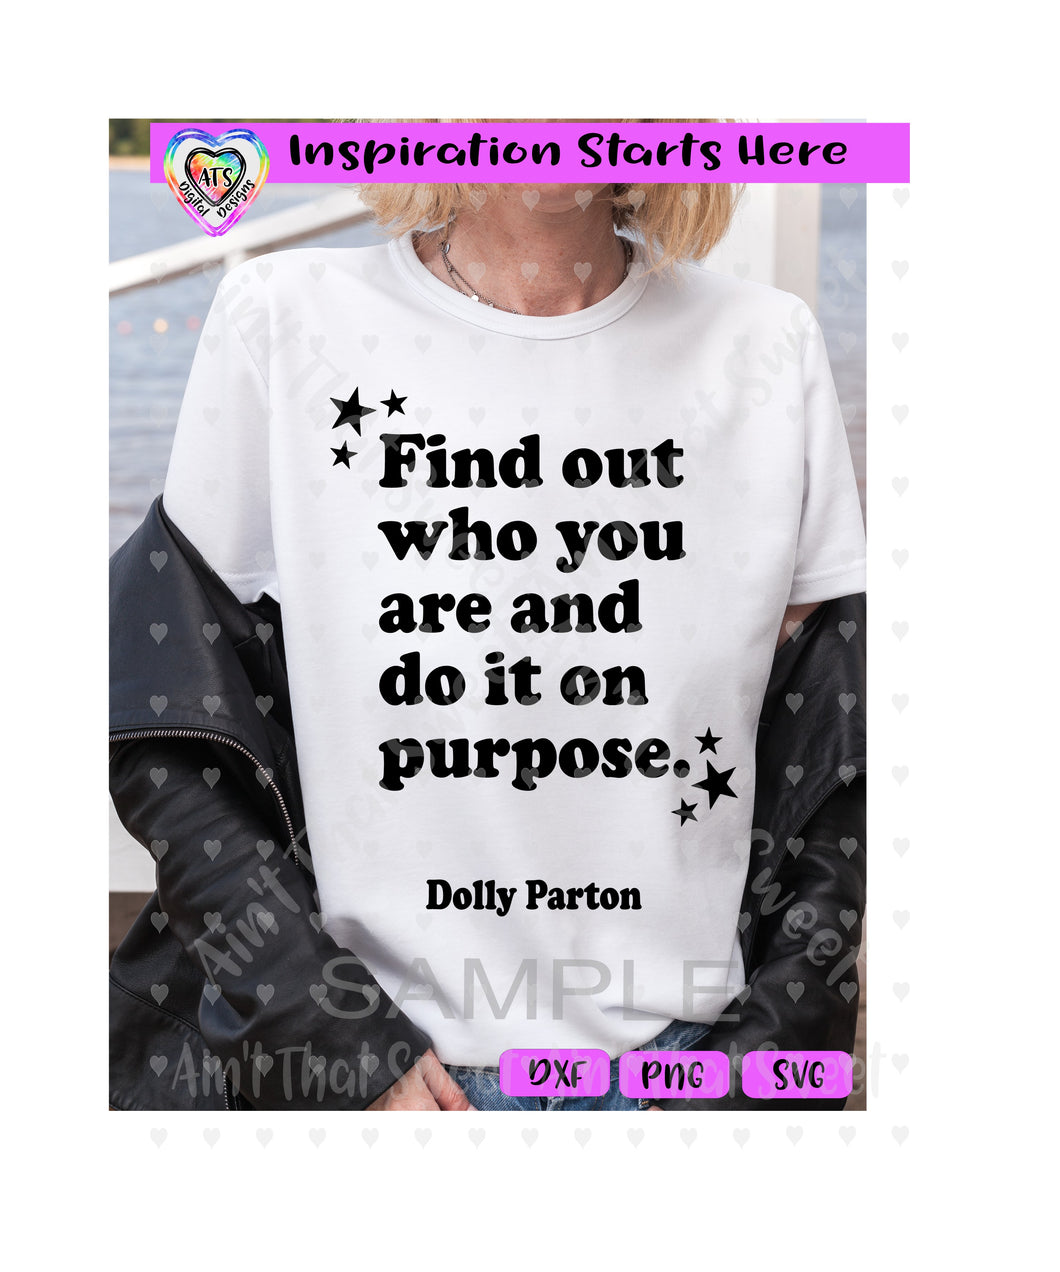 Find Out Who You Are and Do It On Purpose | Dolly Parton - Transparent PNG SVG DXF - Silhouette, Cricut, ScanNCut